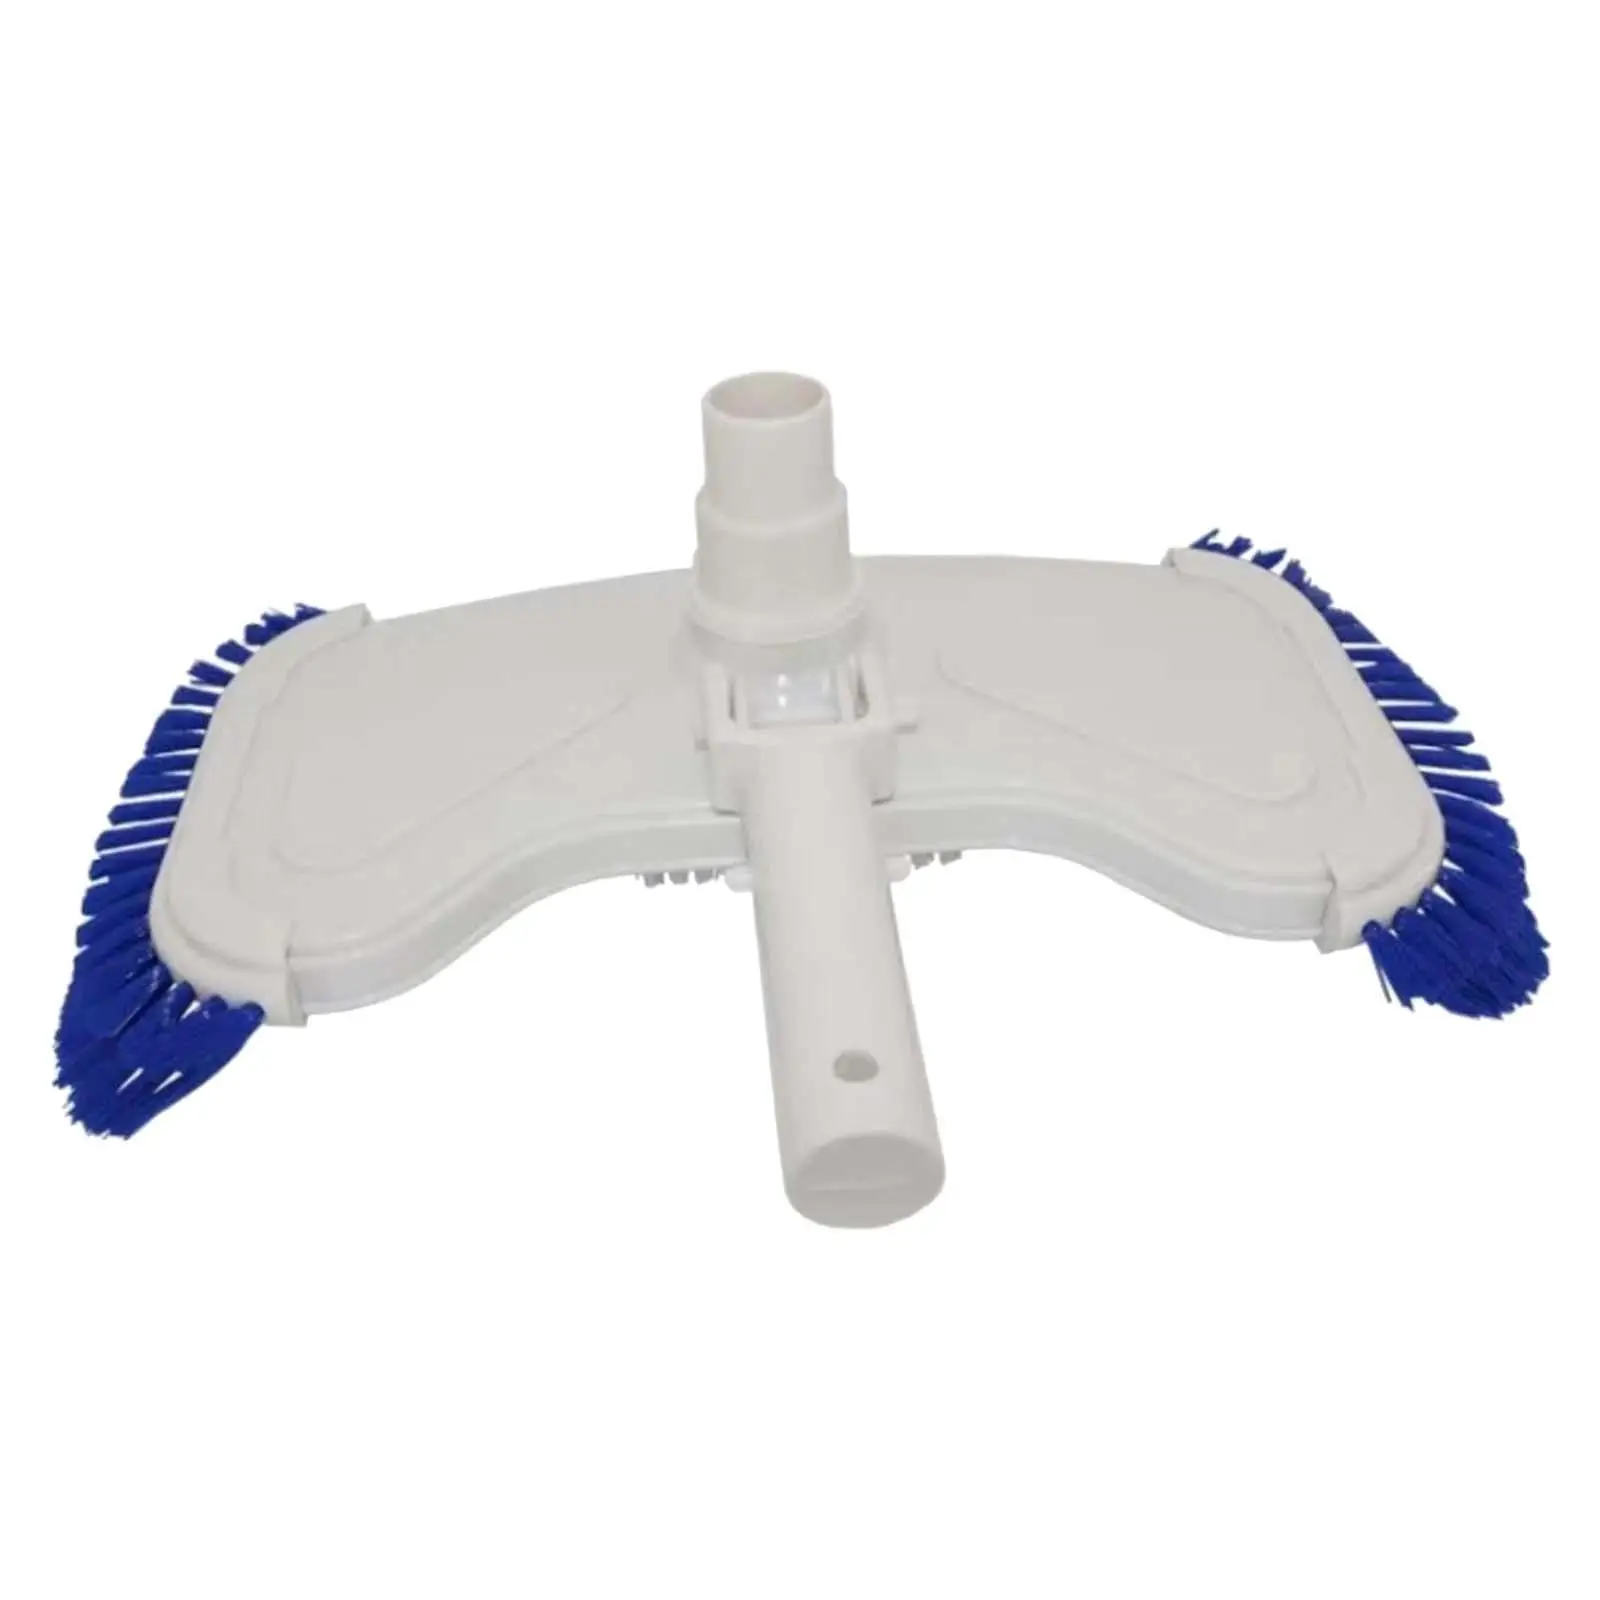 Swimming Pool Suction Head Pool Cleaning Suction Head Vacuum Pool Brush Head for Pond above Ground Pool Hot Tub